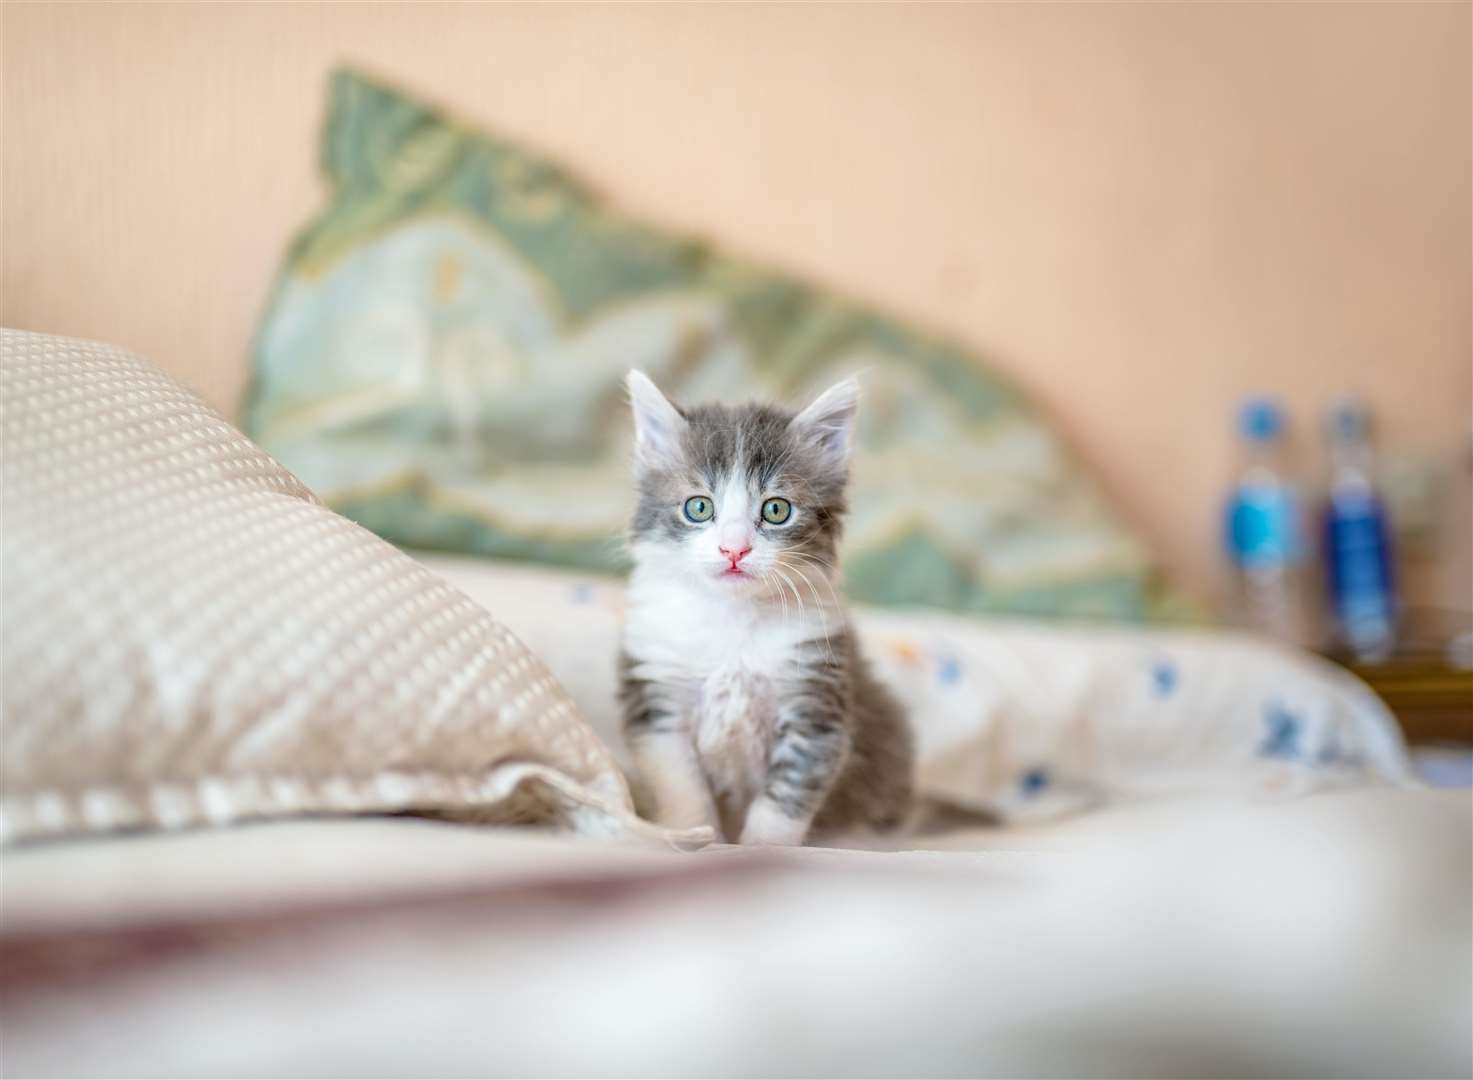 Cats like to squeeze into tight spaces. Picture: Kote Puerto, unsplash